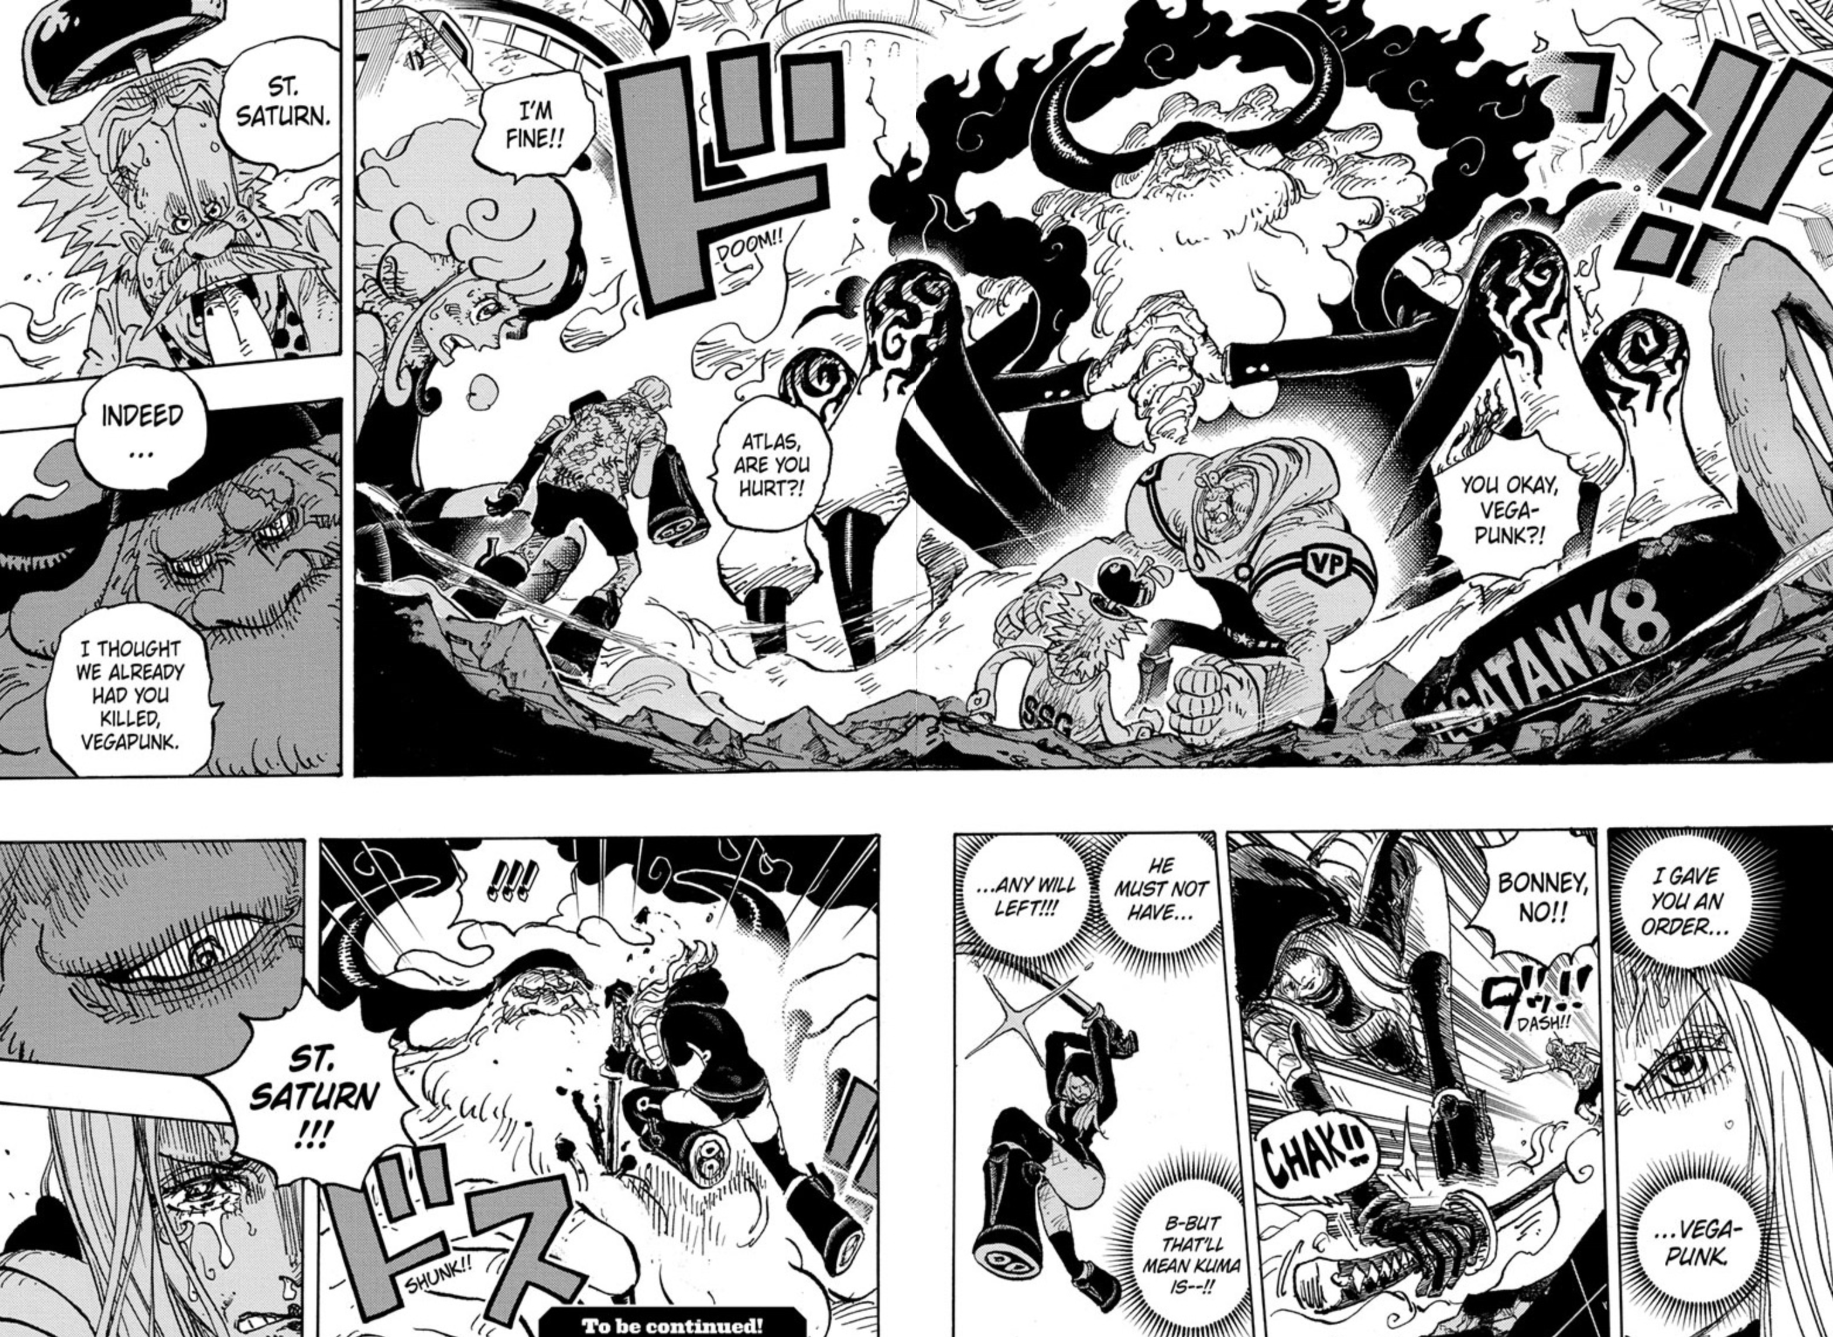 One Piece Chapter 1094 Pages 18-19